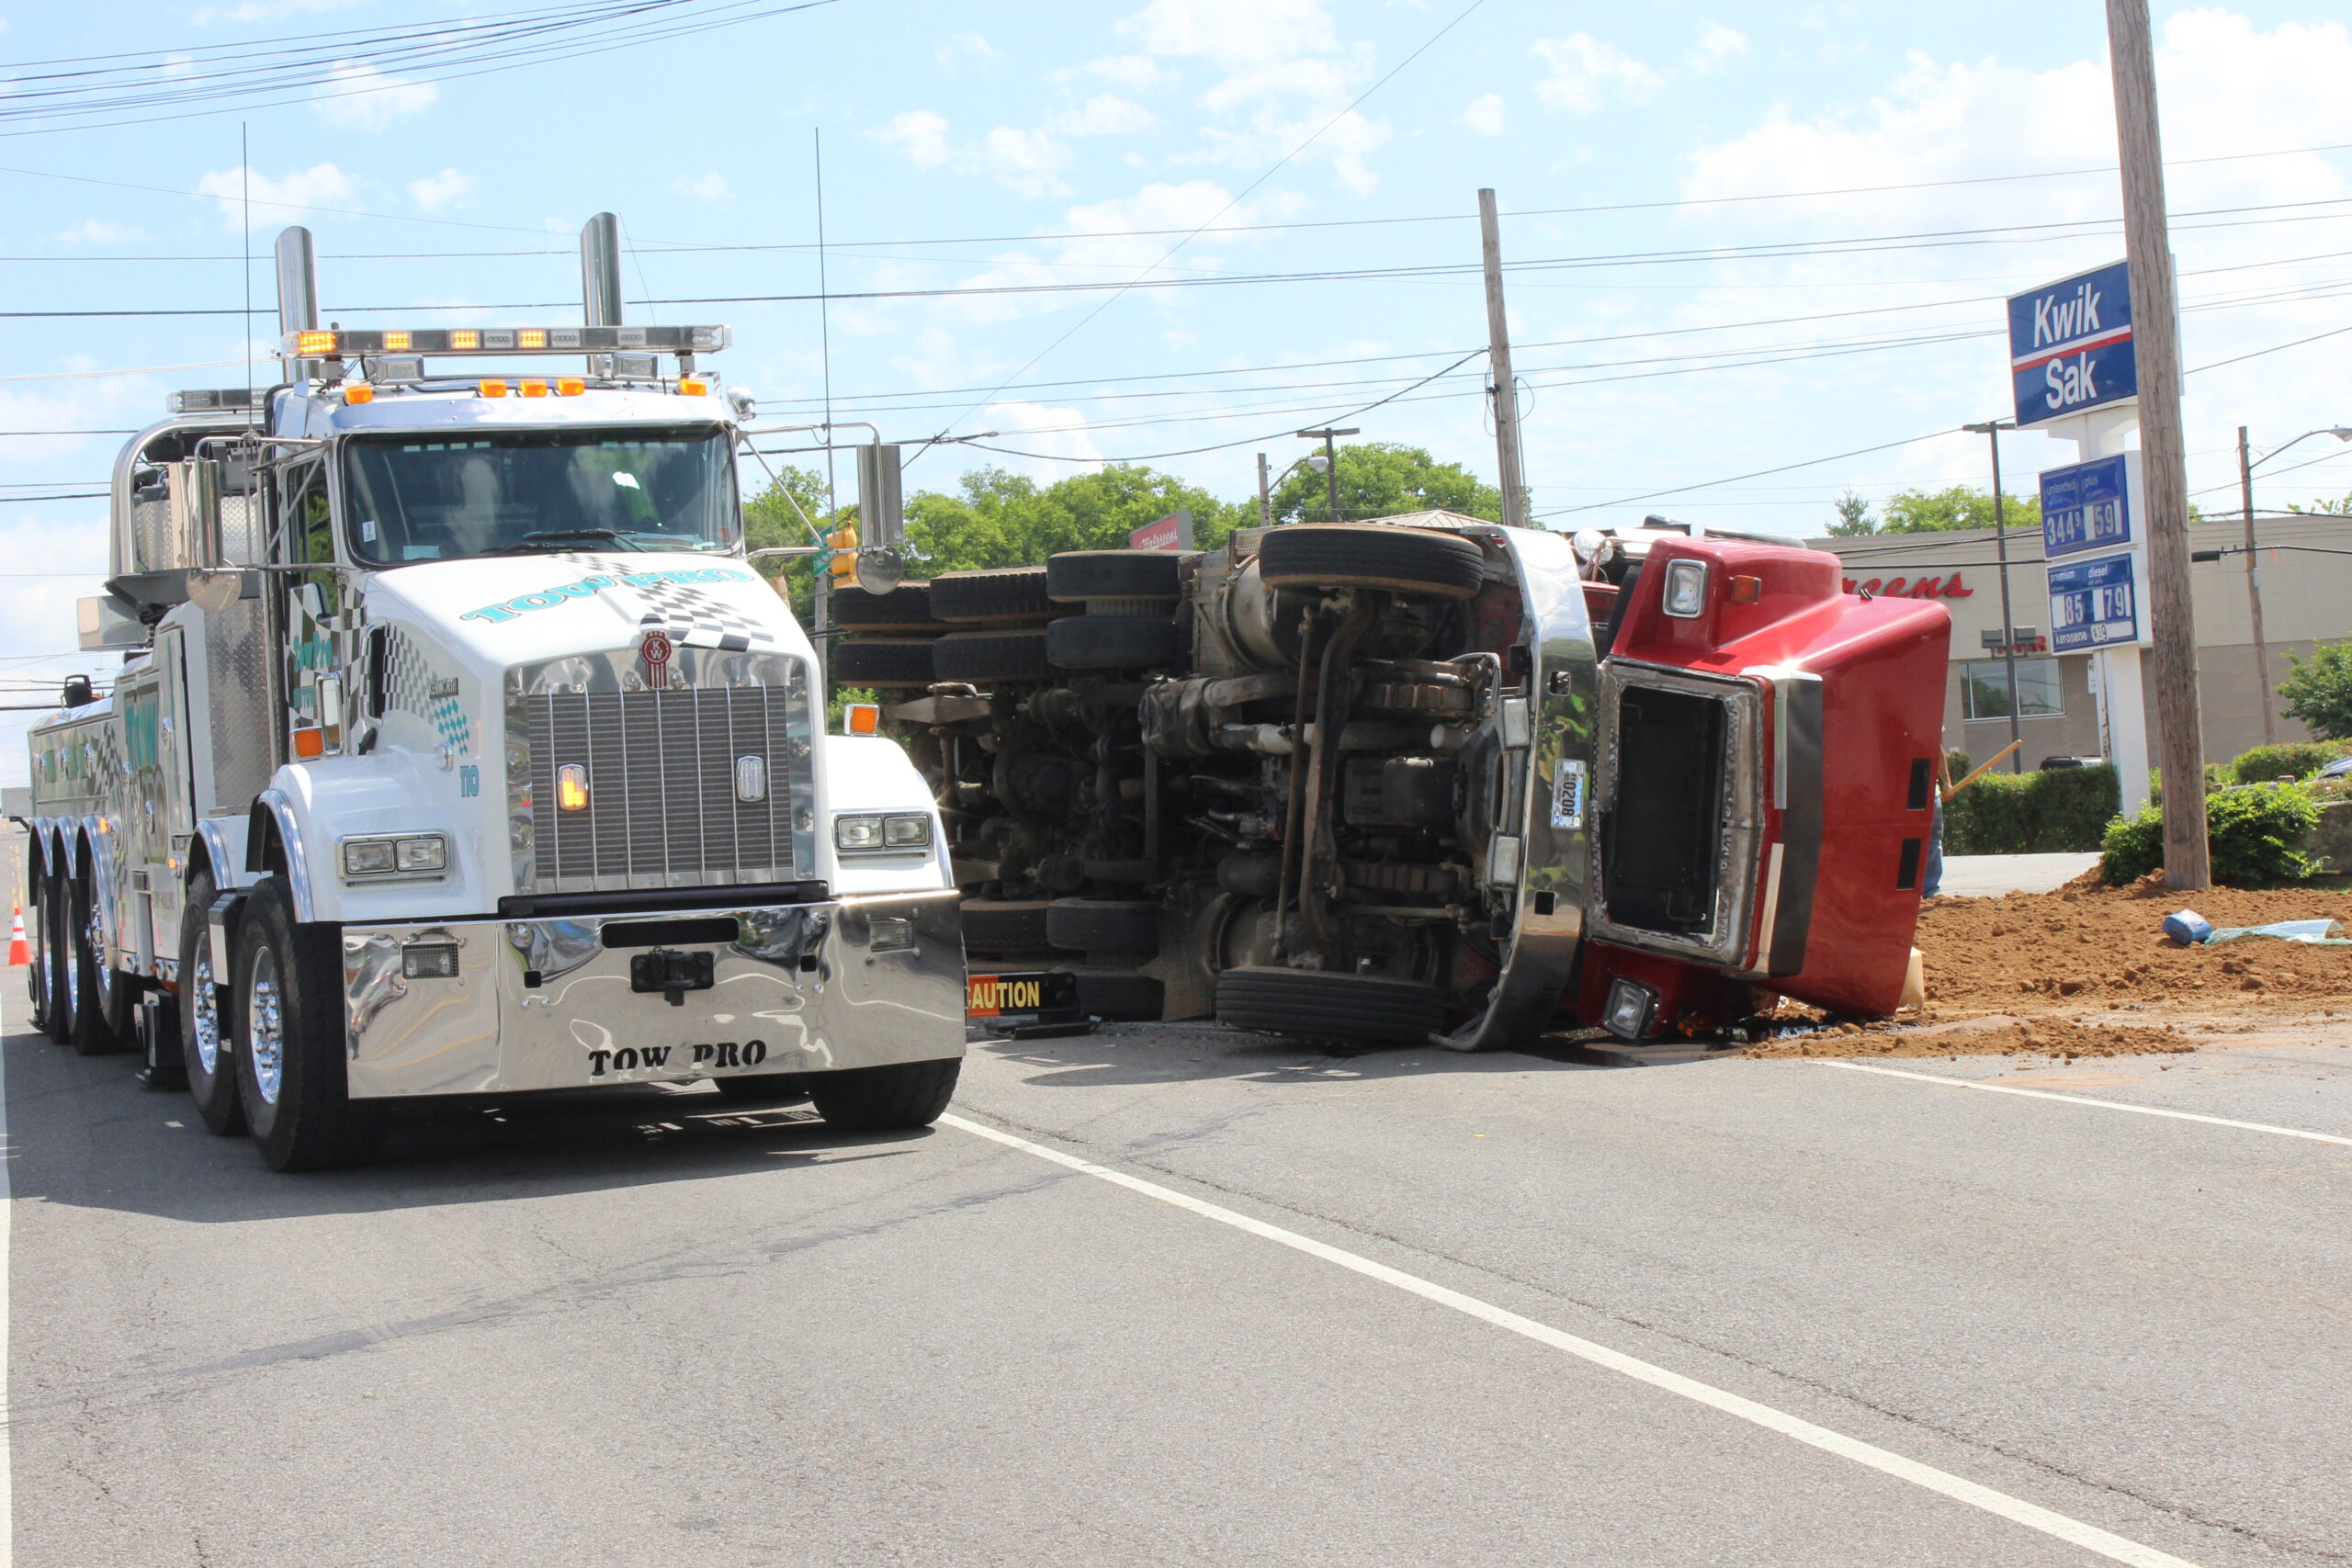 A tow pro truck pulled to the side of the road next to a over turned red semi-truck.